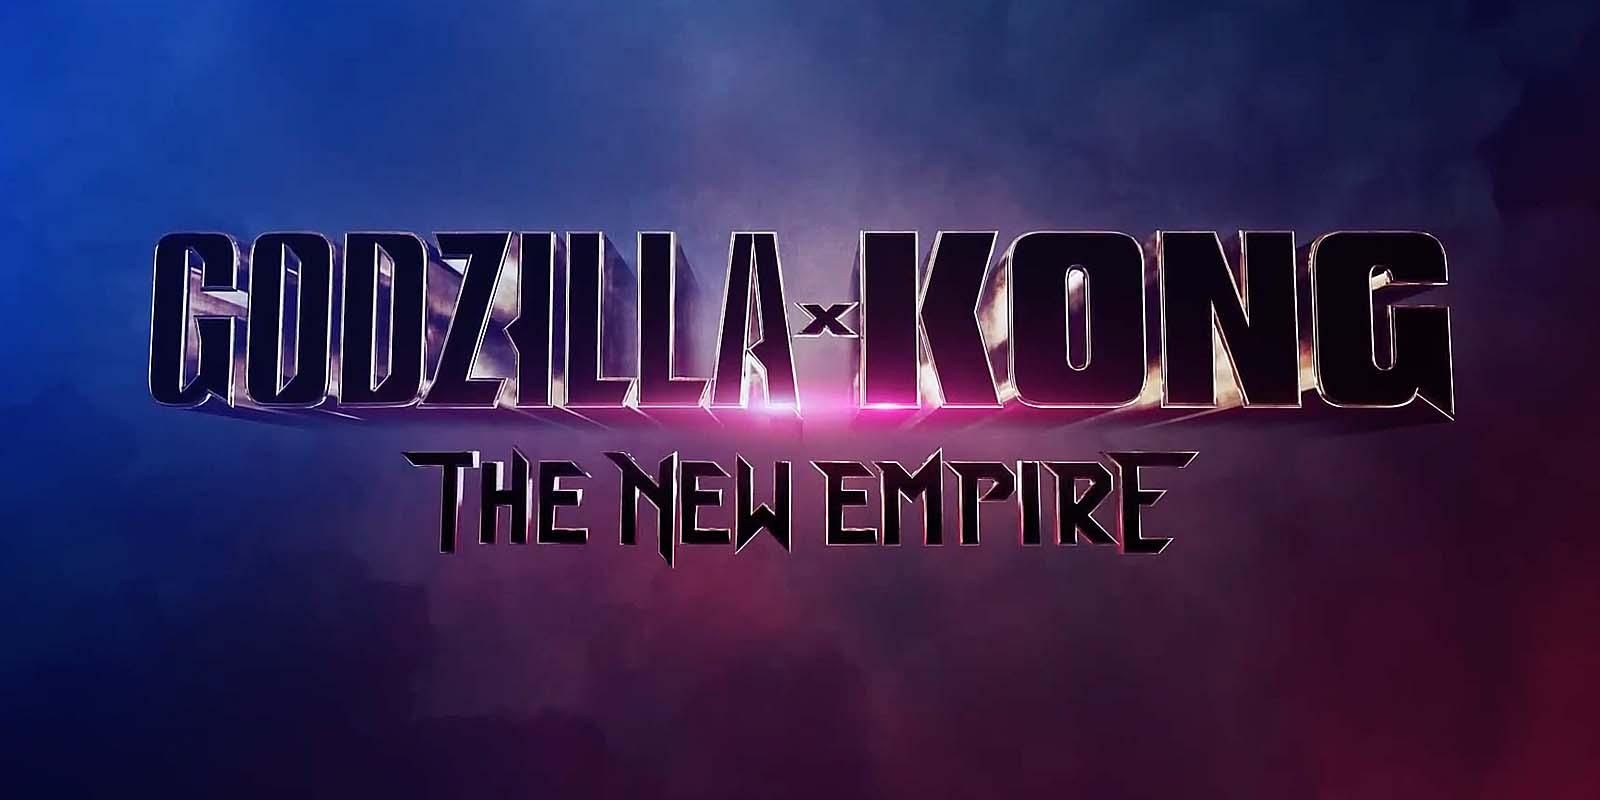 The words Godzilla x Kong: The New Empire against a dark purple background.